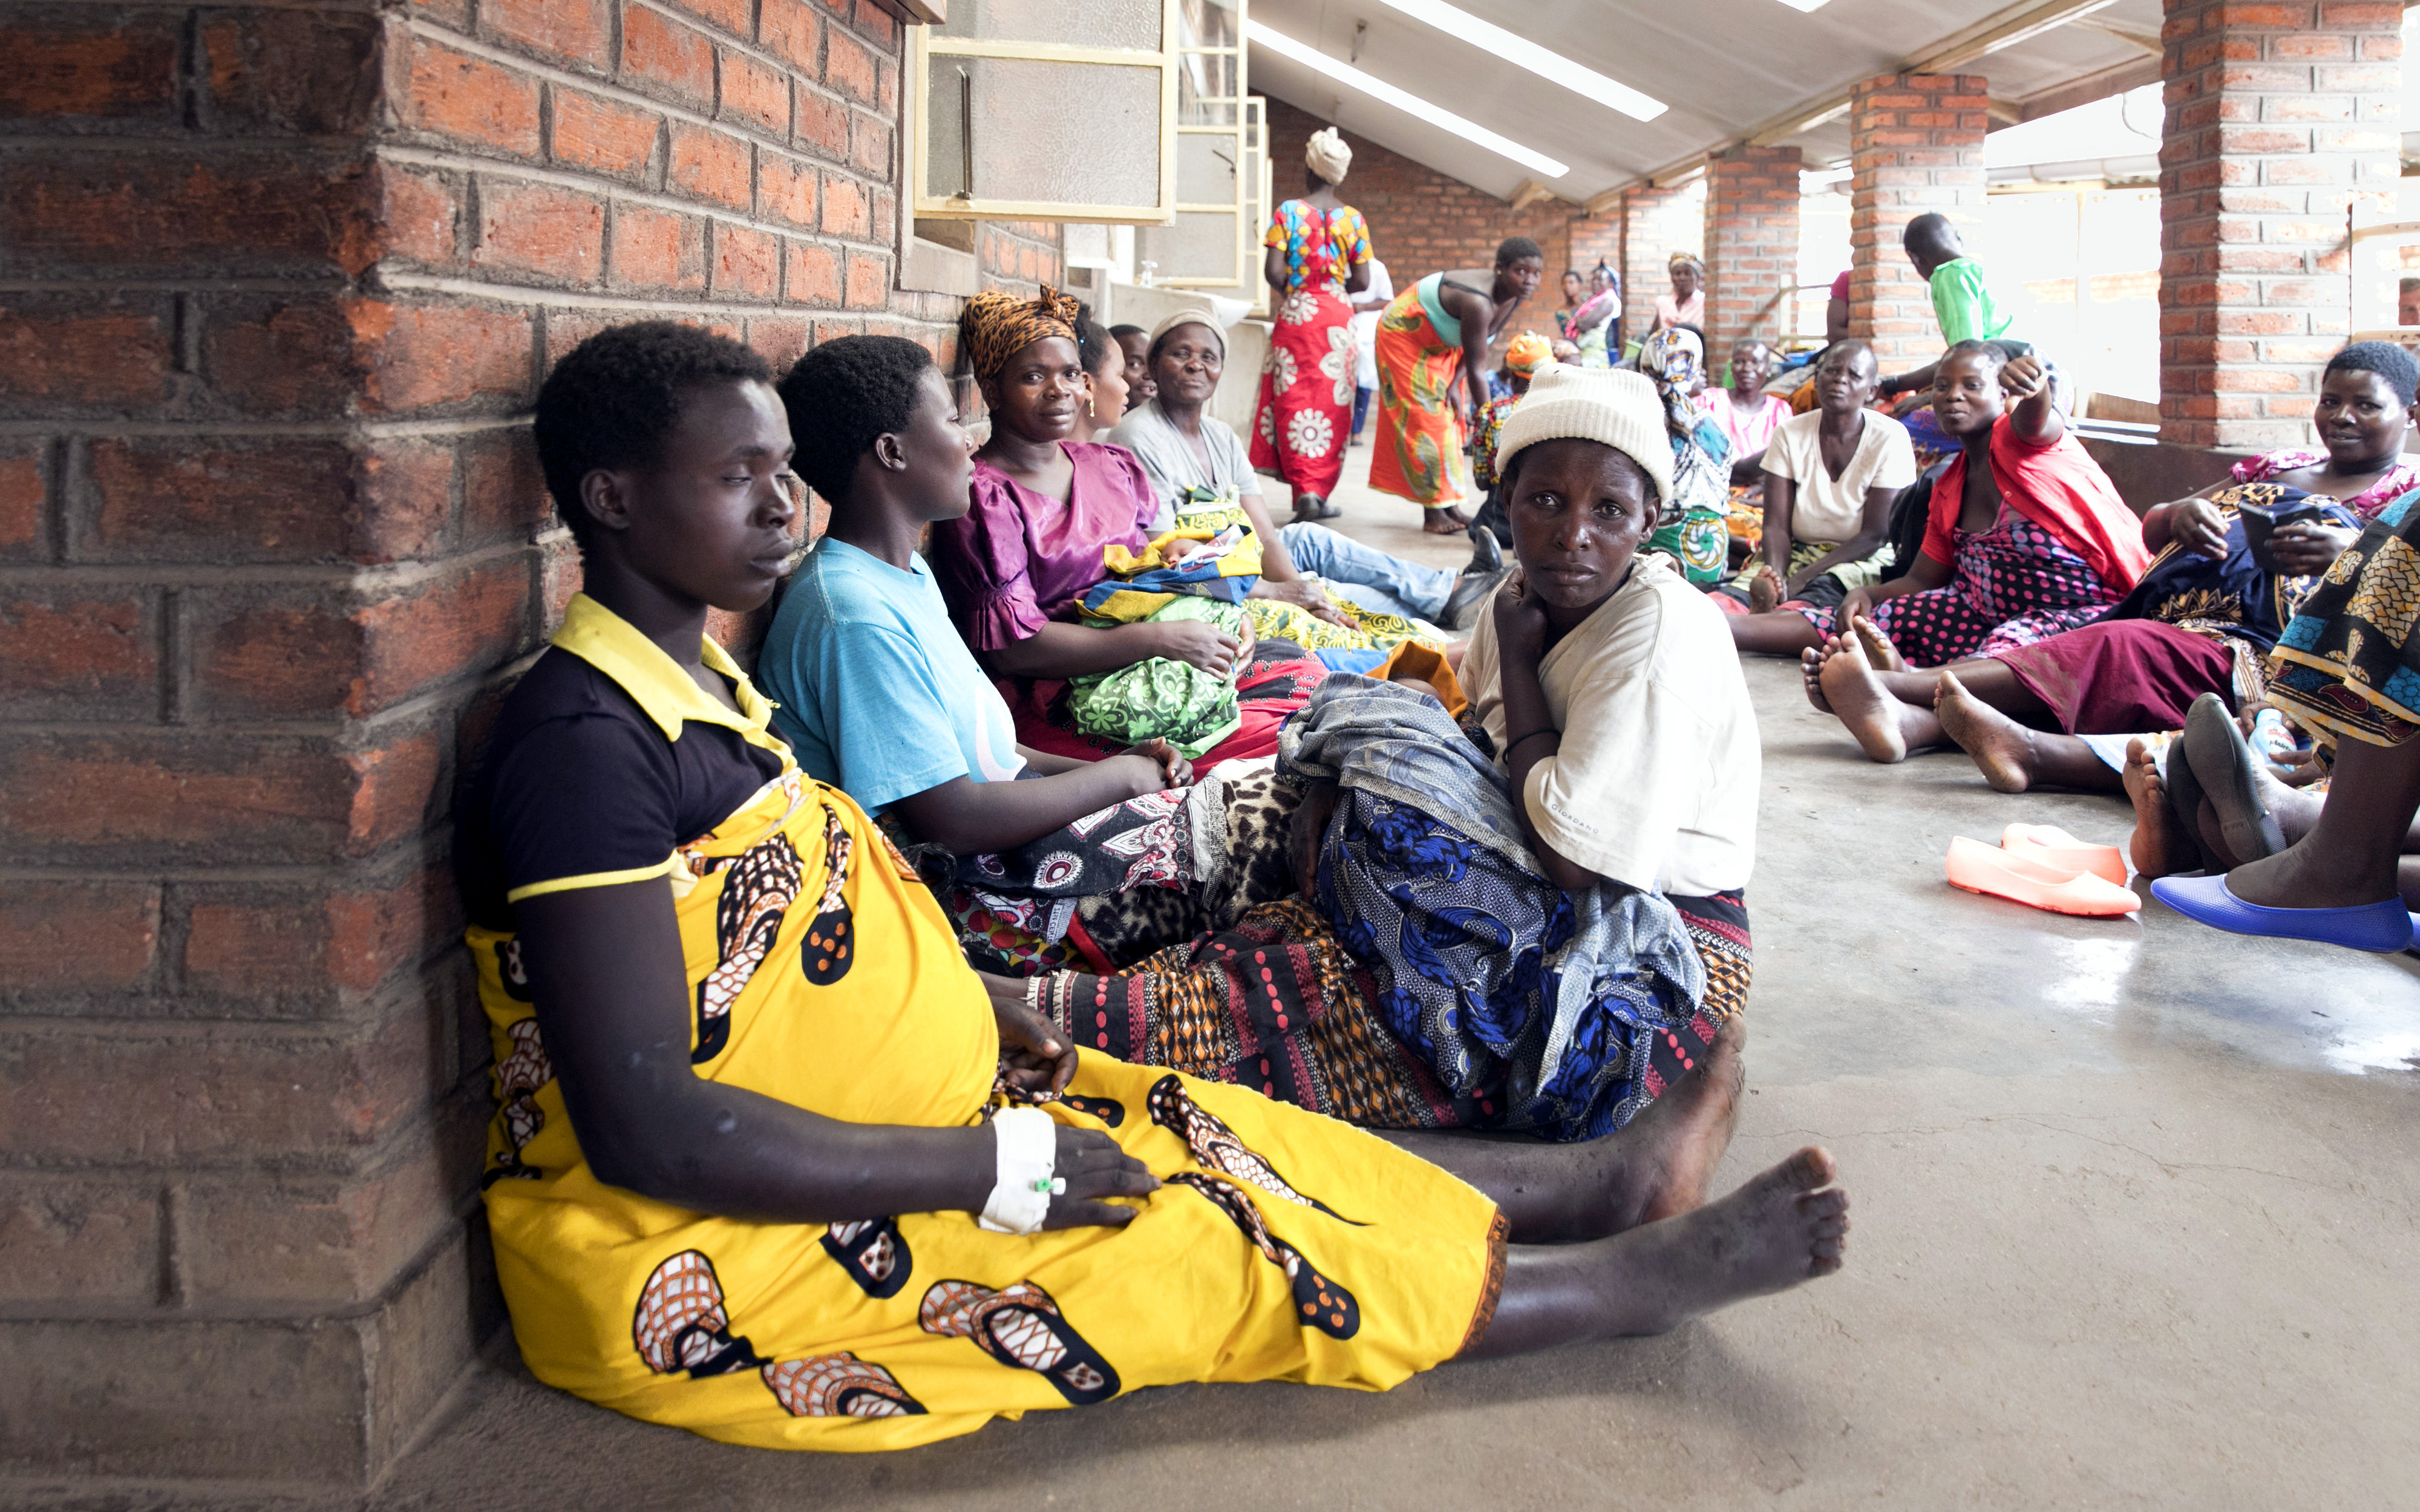 Women patients waiting at the maternity ward of Nkhoma Hospital, Malawi Many women, some of them visibility pregnant, are sitting on the ground in a porch area.